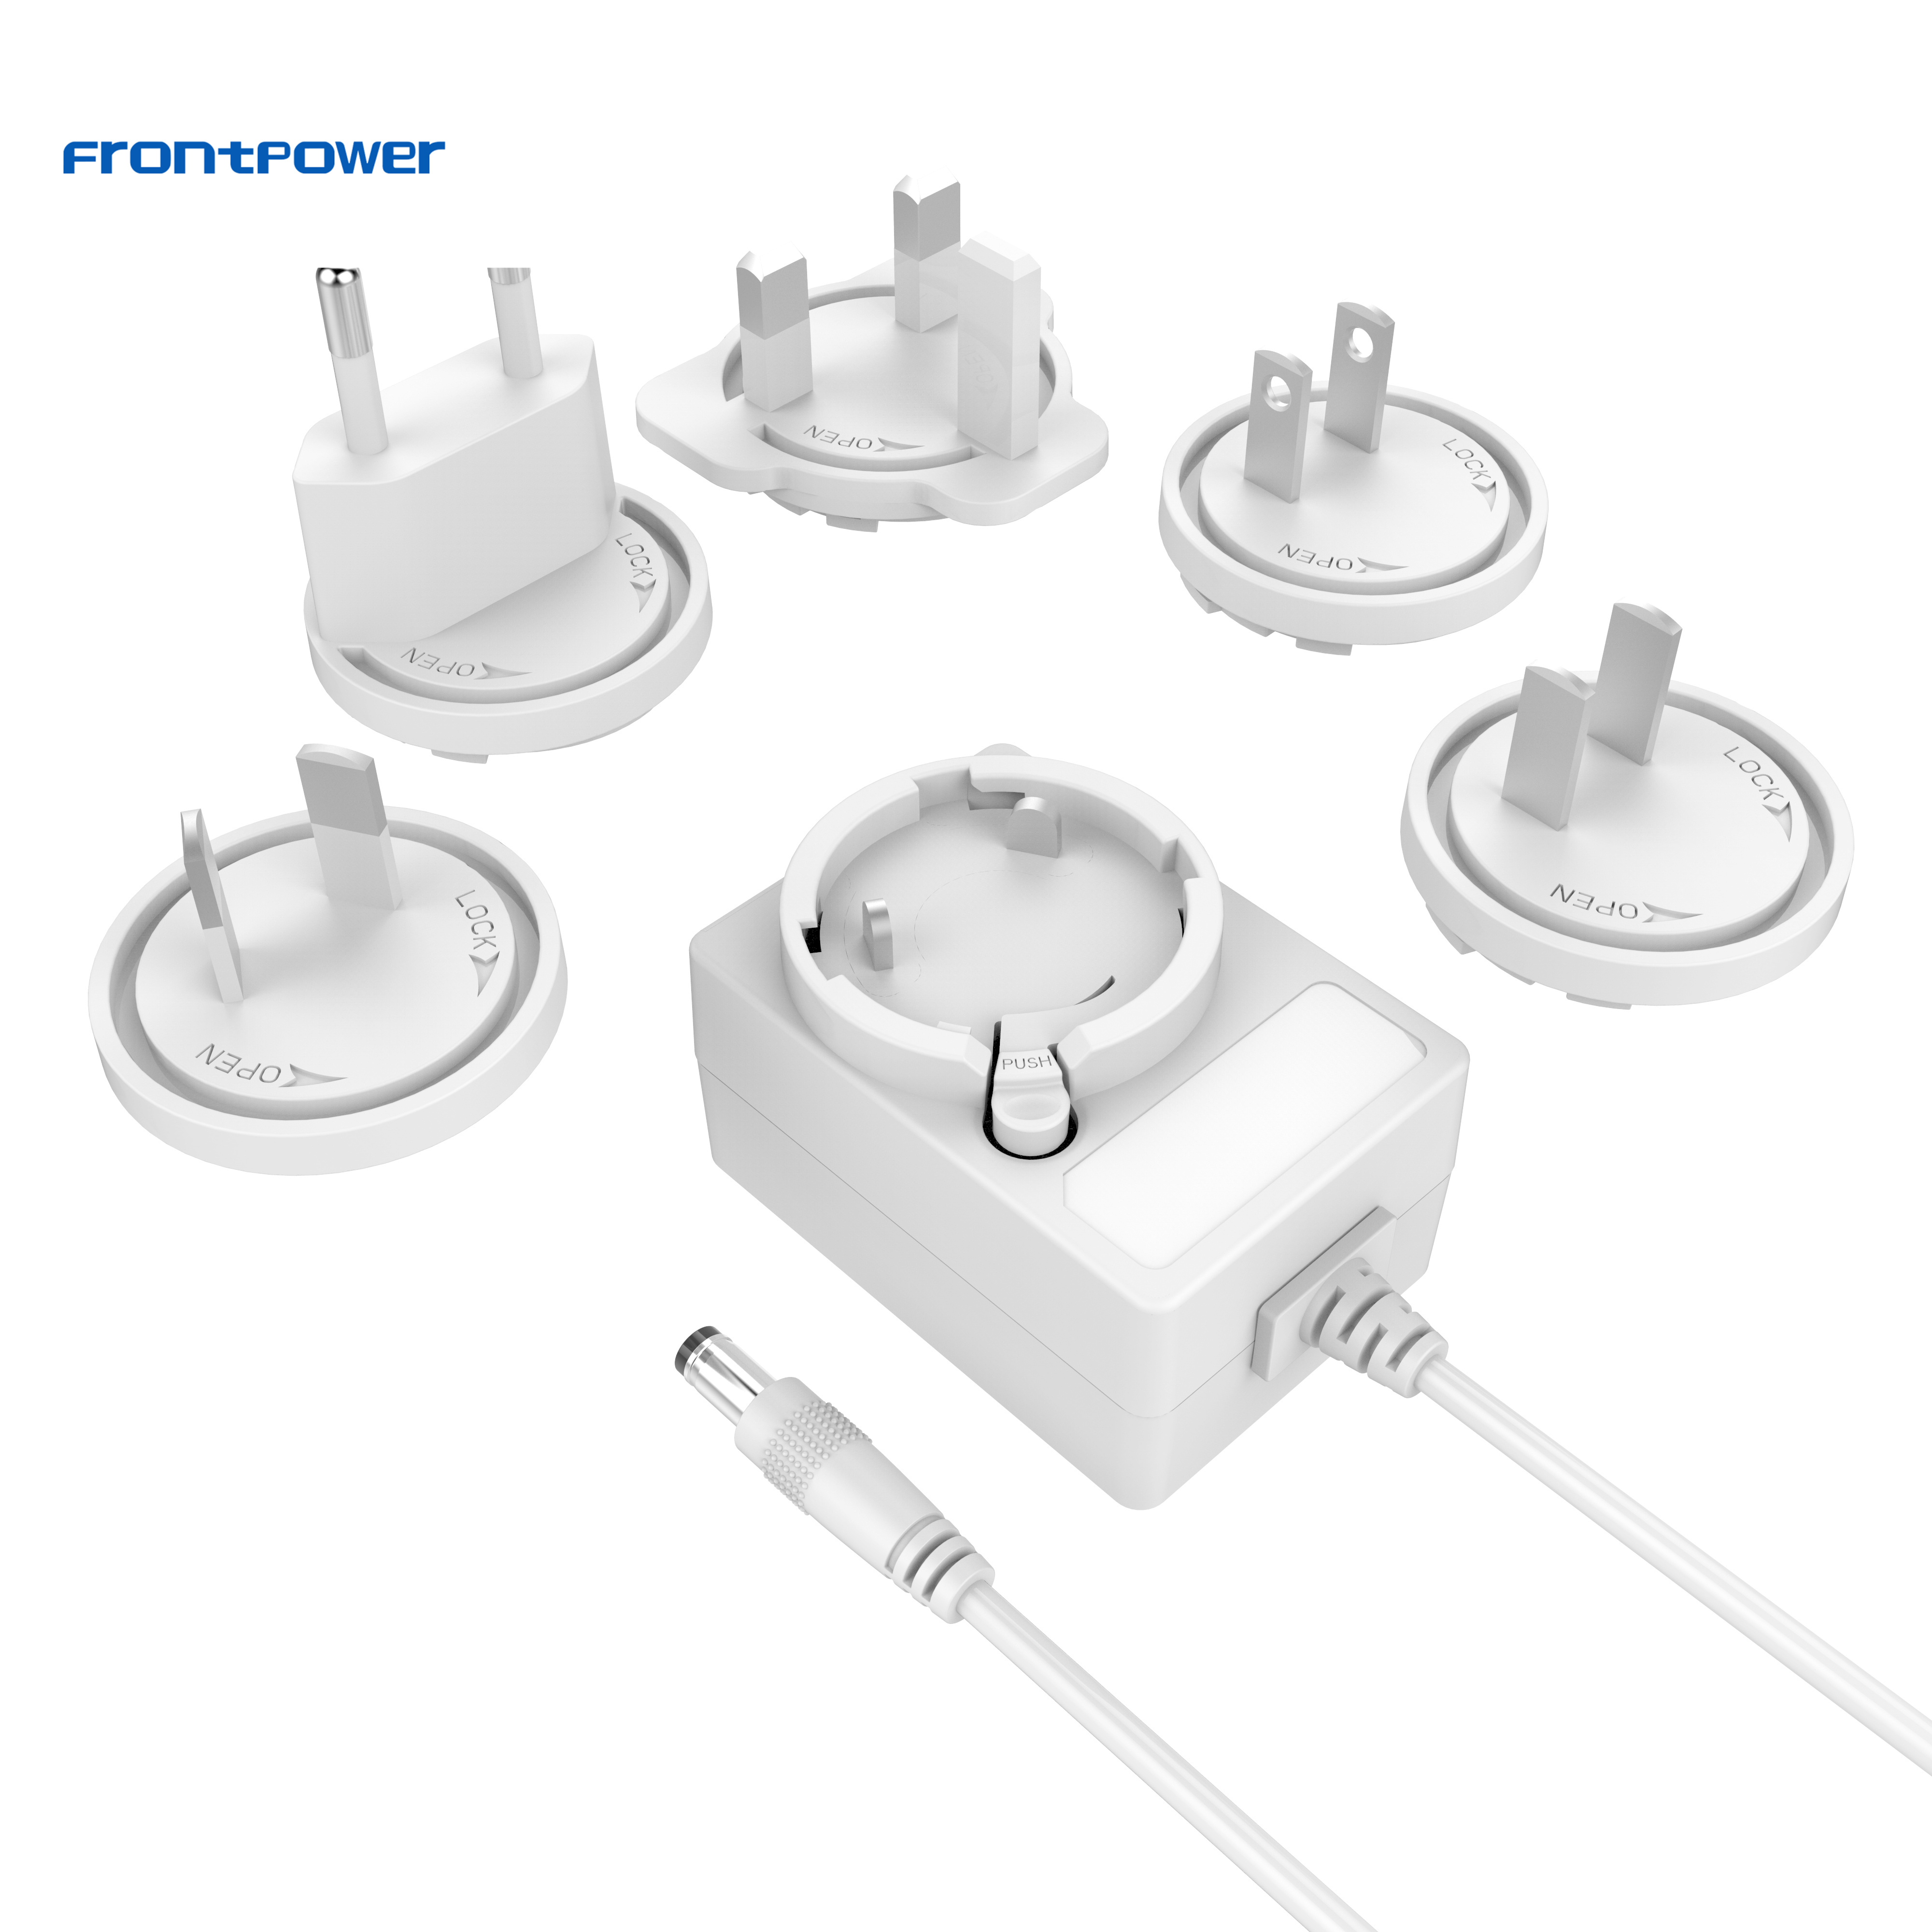 Frontpower 5V 2A interchangeable plug power adapter with EN62368/61558 for cloud connector